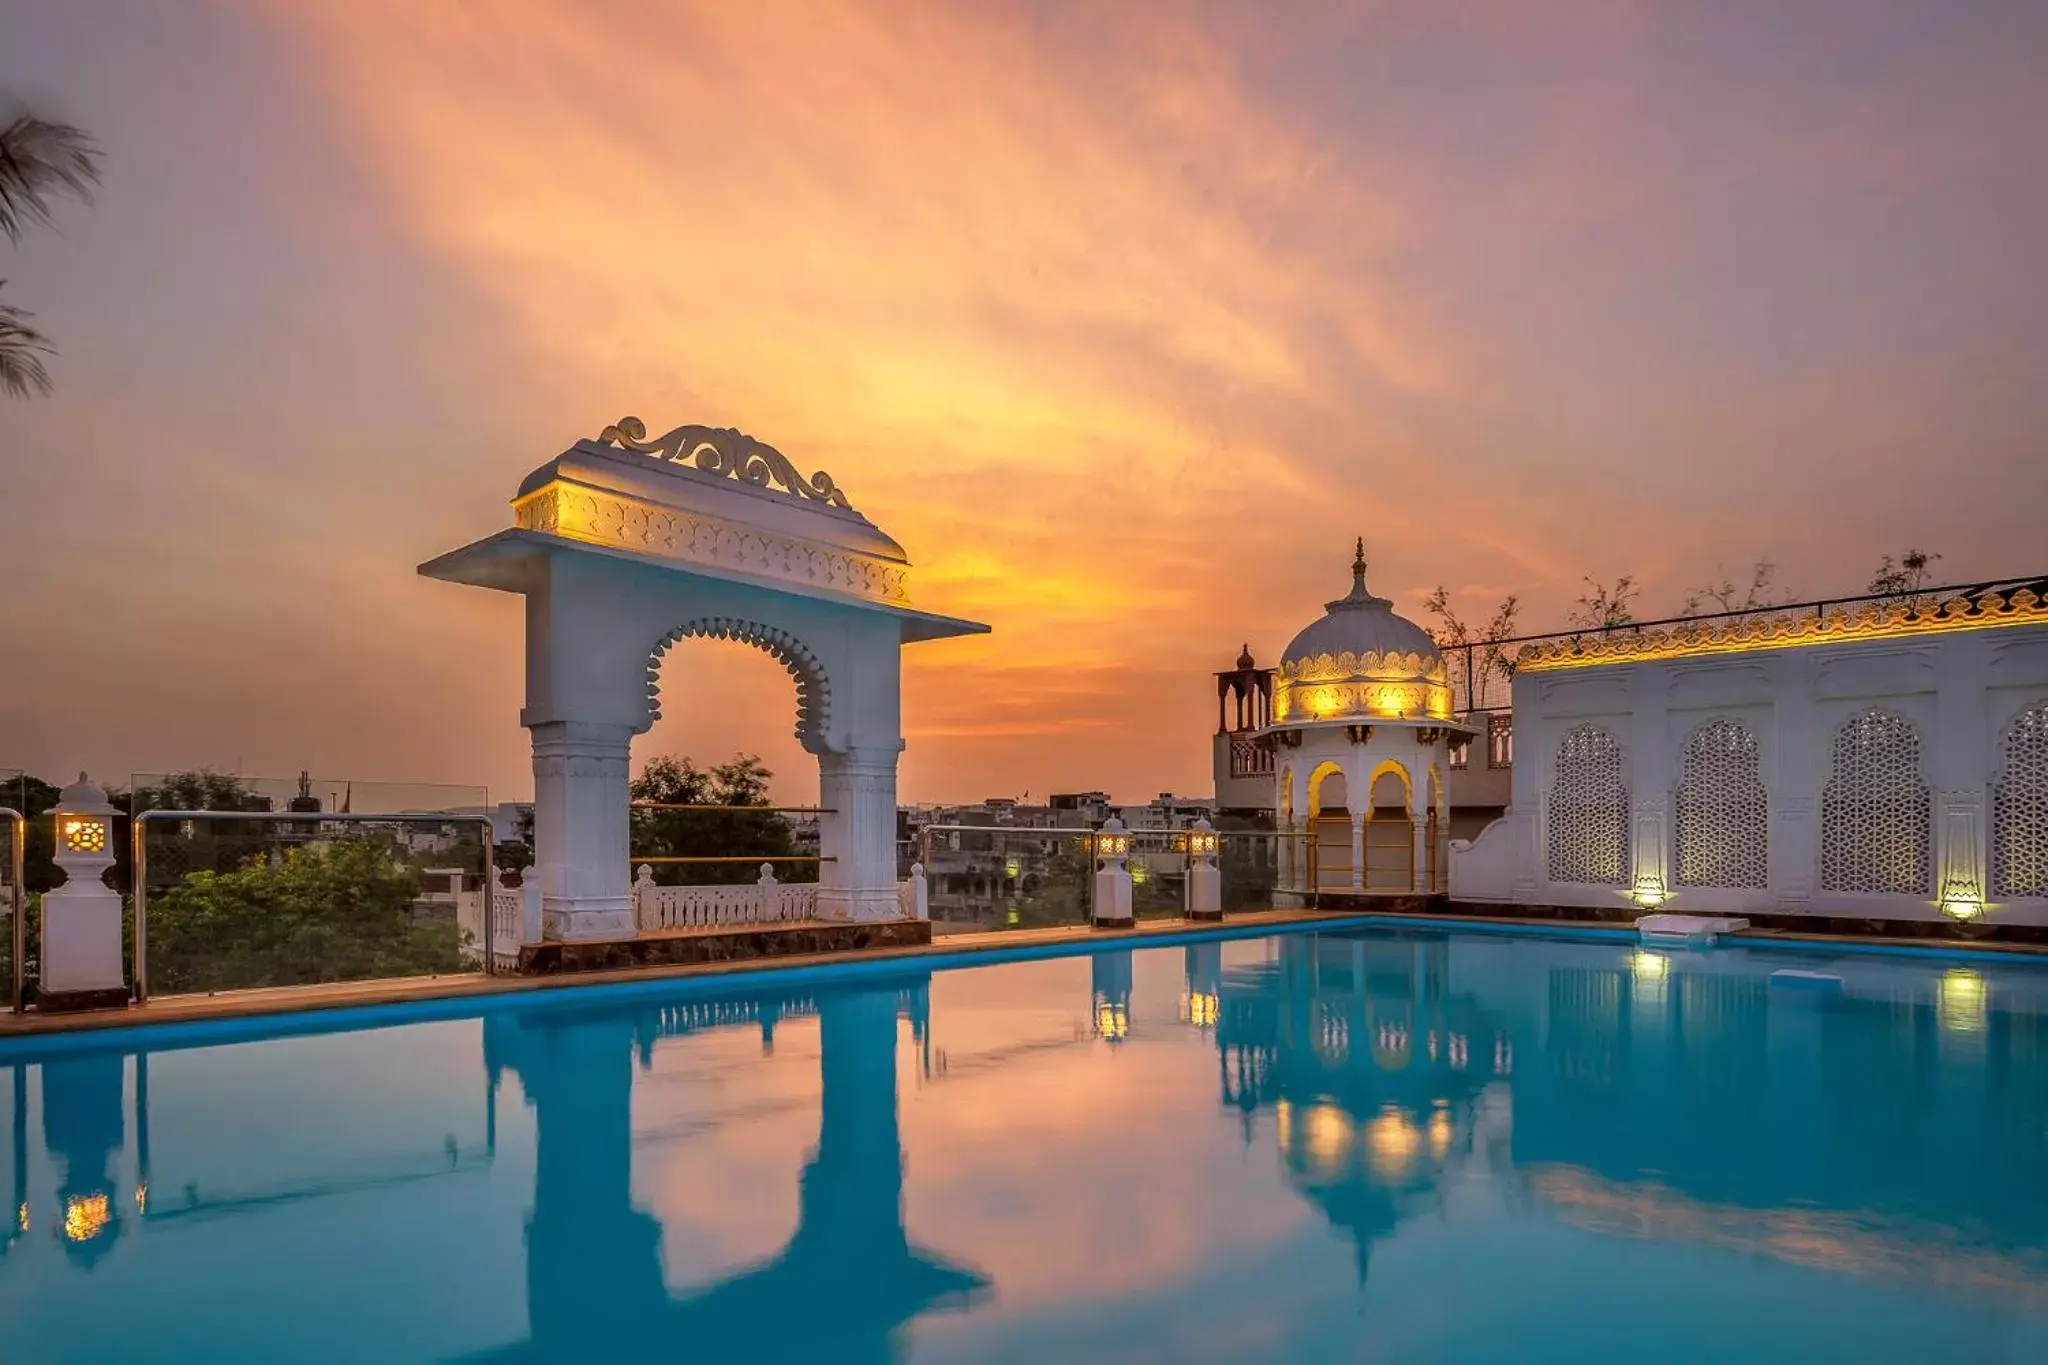 Property building, Sunrise/Sunset in Hotel Rajasthan Palace